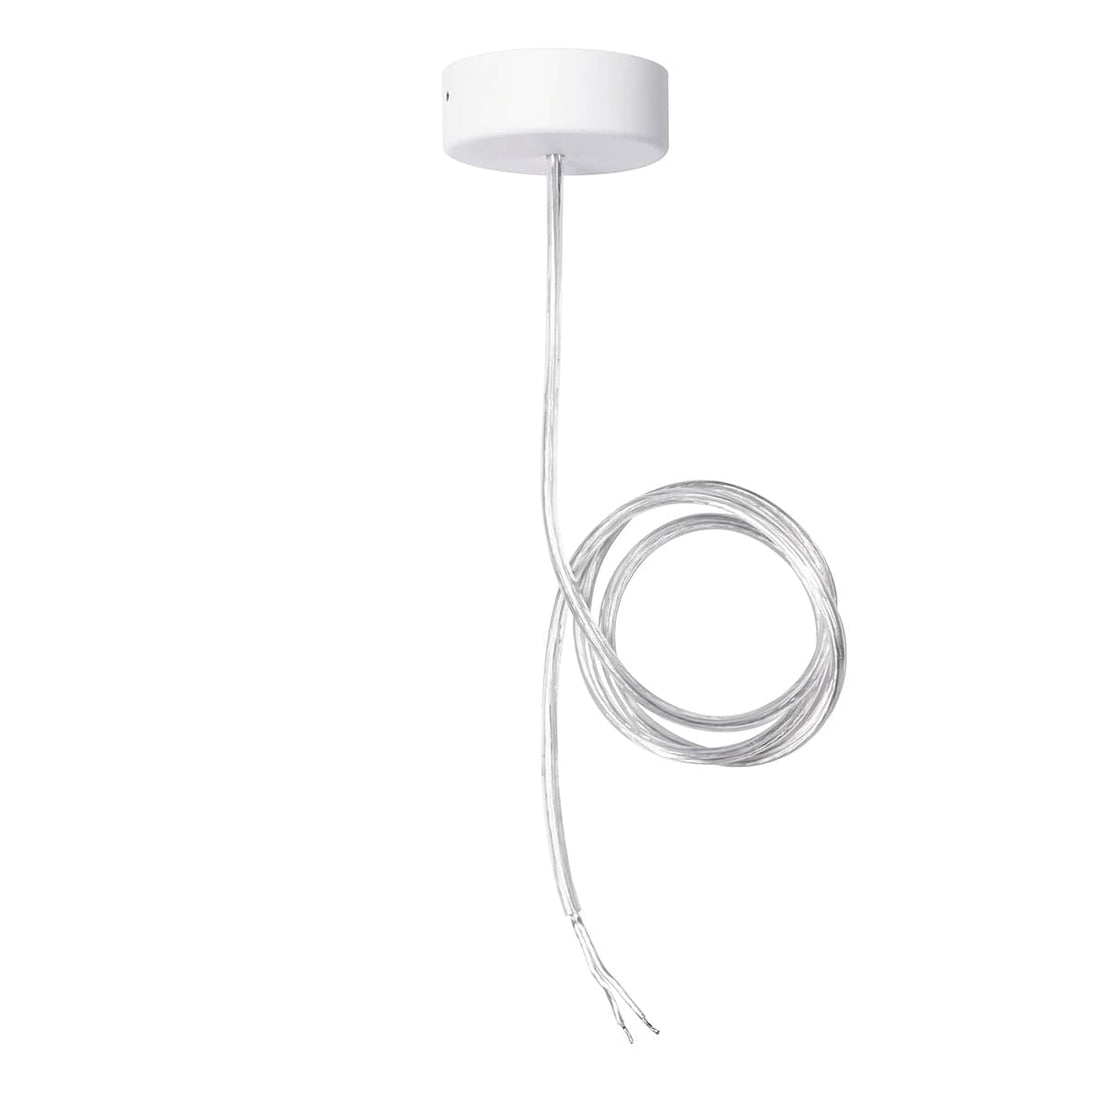 ROSETTE AND CABLE FOR LED PANELS